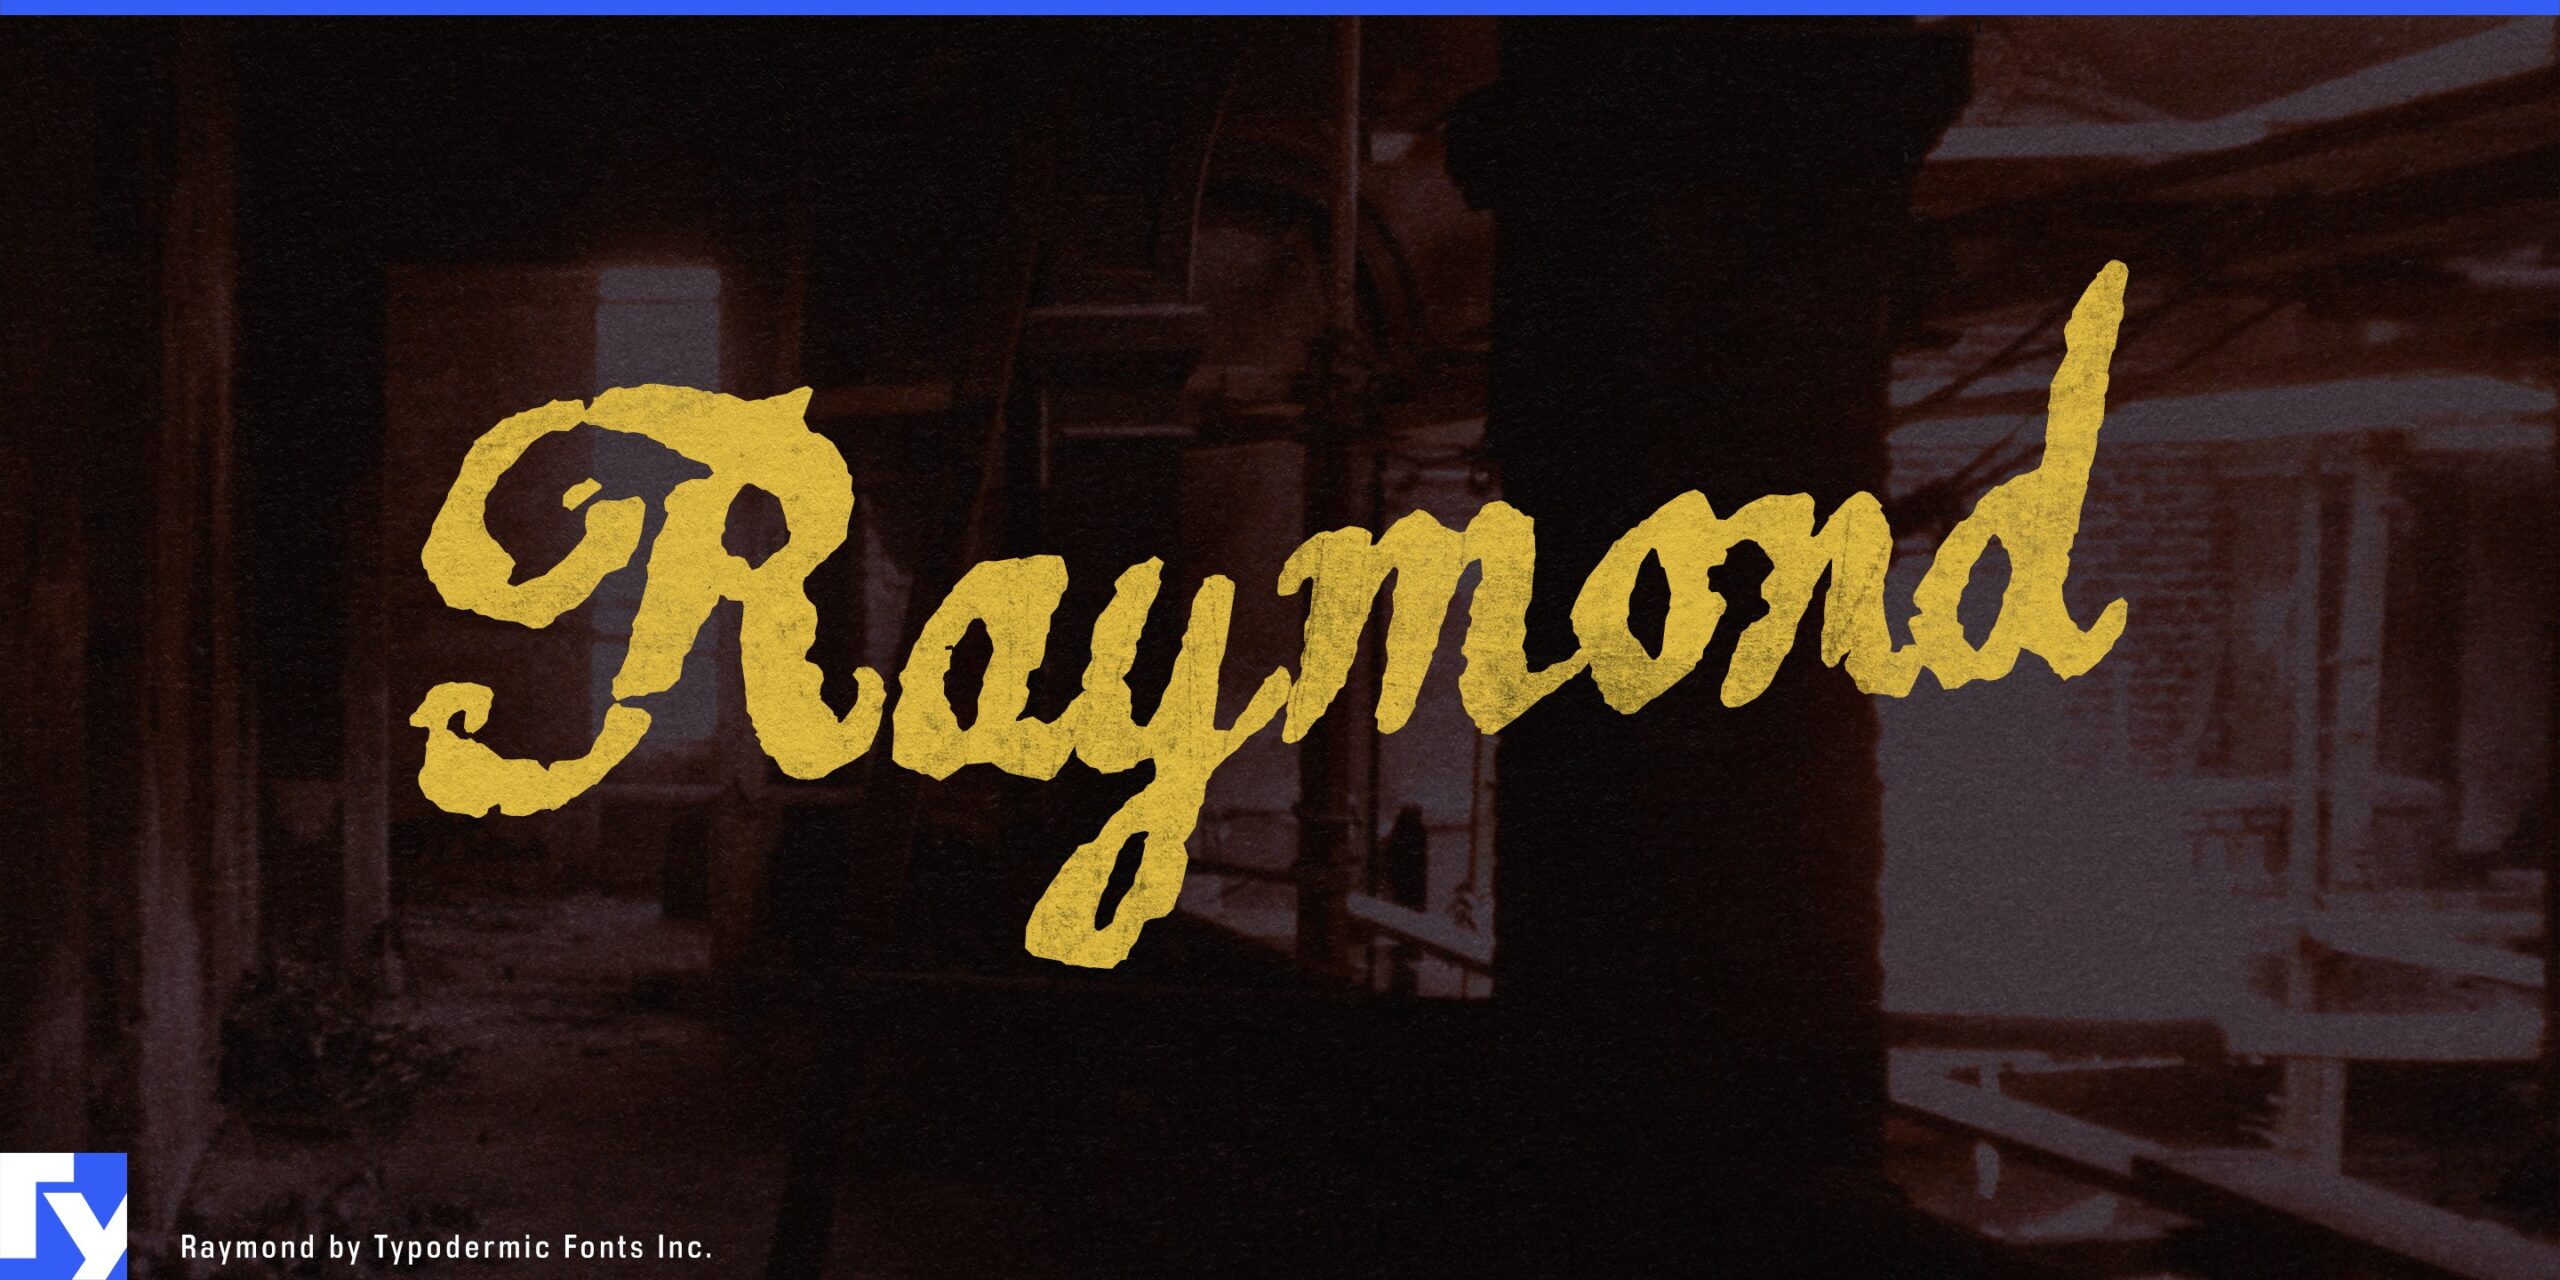 Raymond: The beauty of imperfection in typography